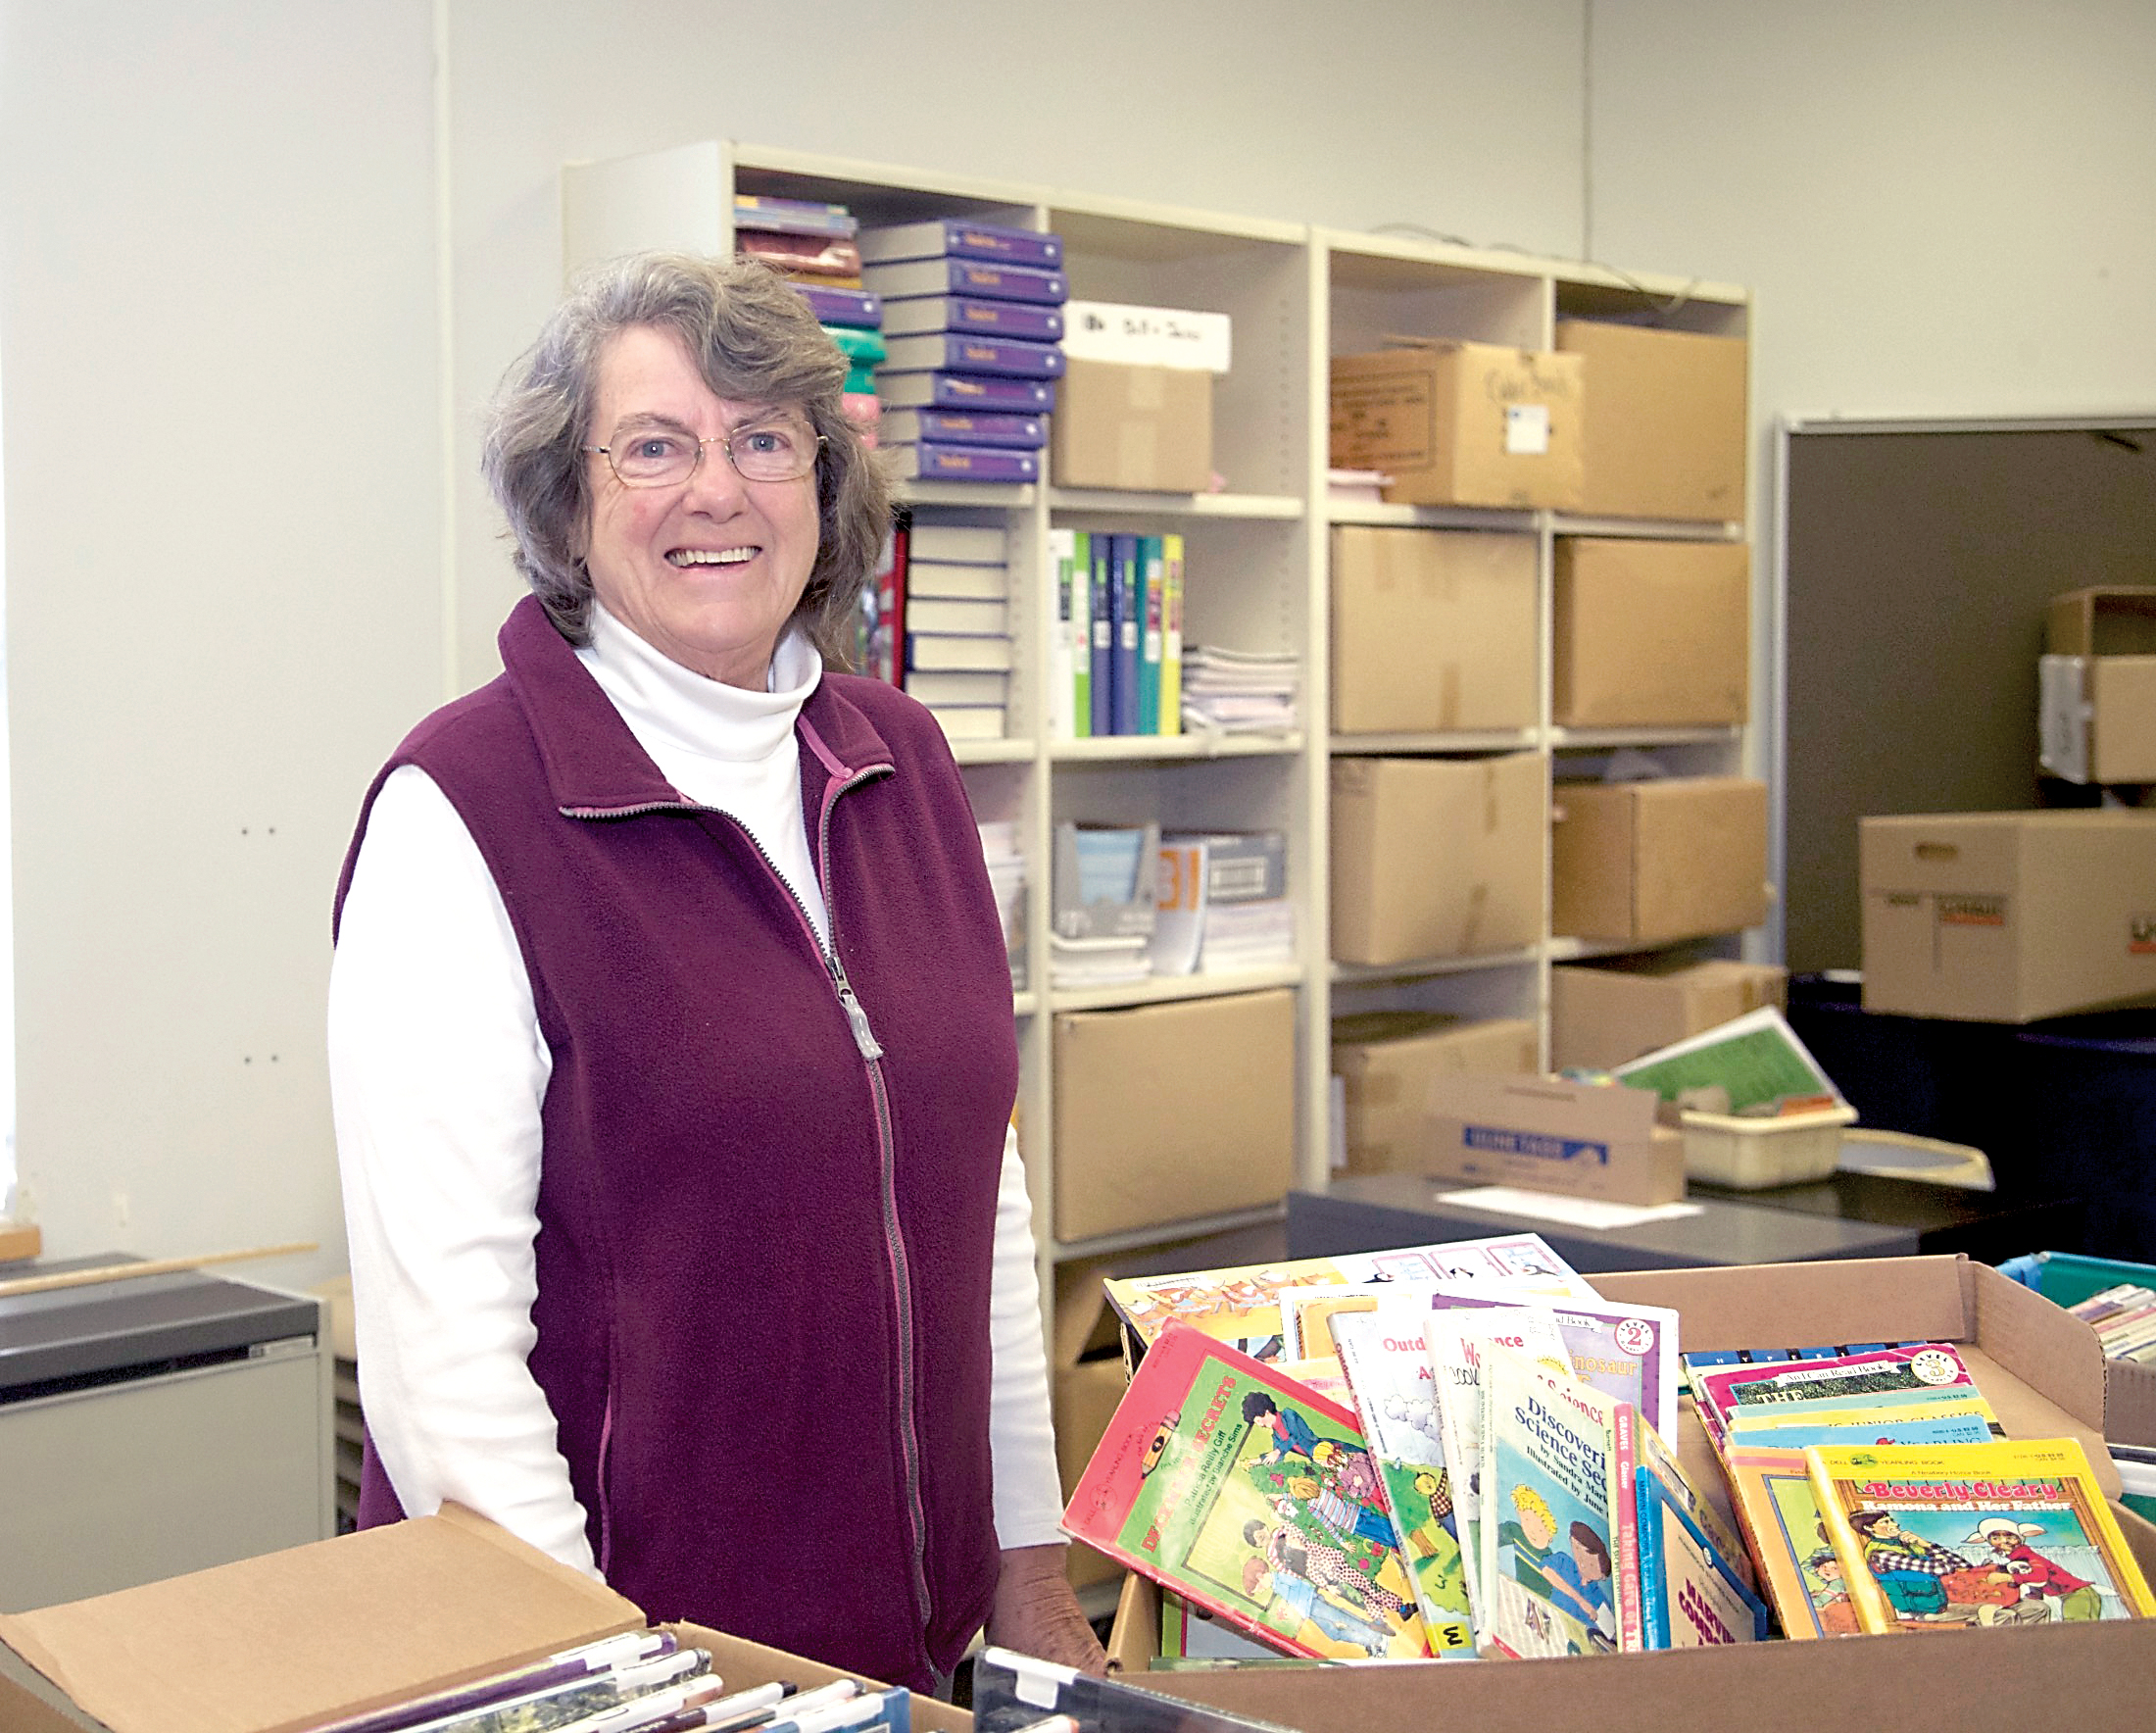 2016 Heart of Service winners Elma Beary in the book holding room at Chimacum Elementary School. (Steve Mullensky/for Peninsula Daily News)